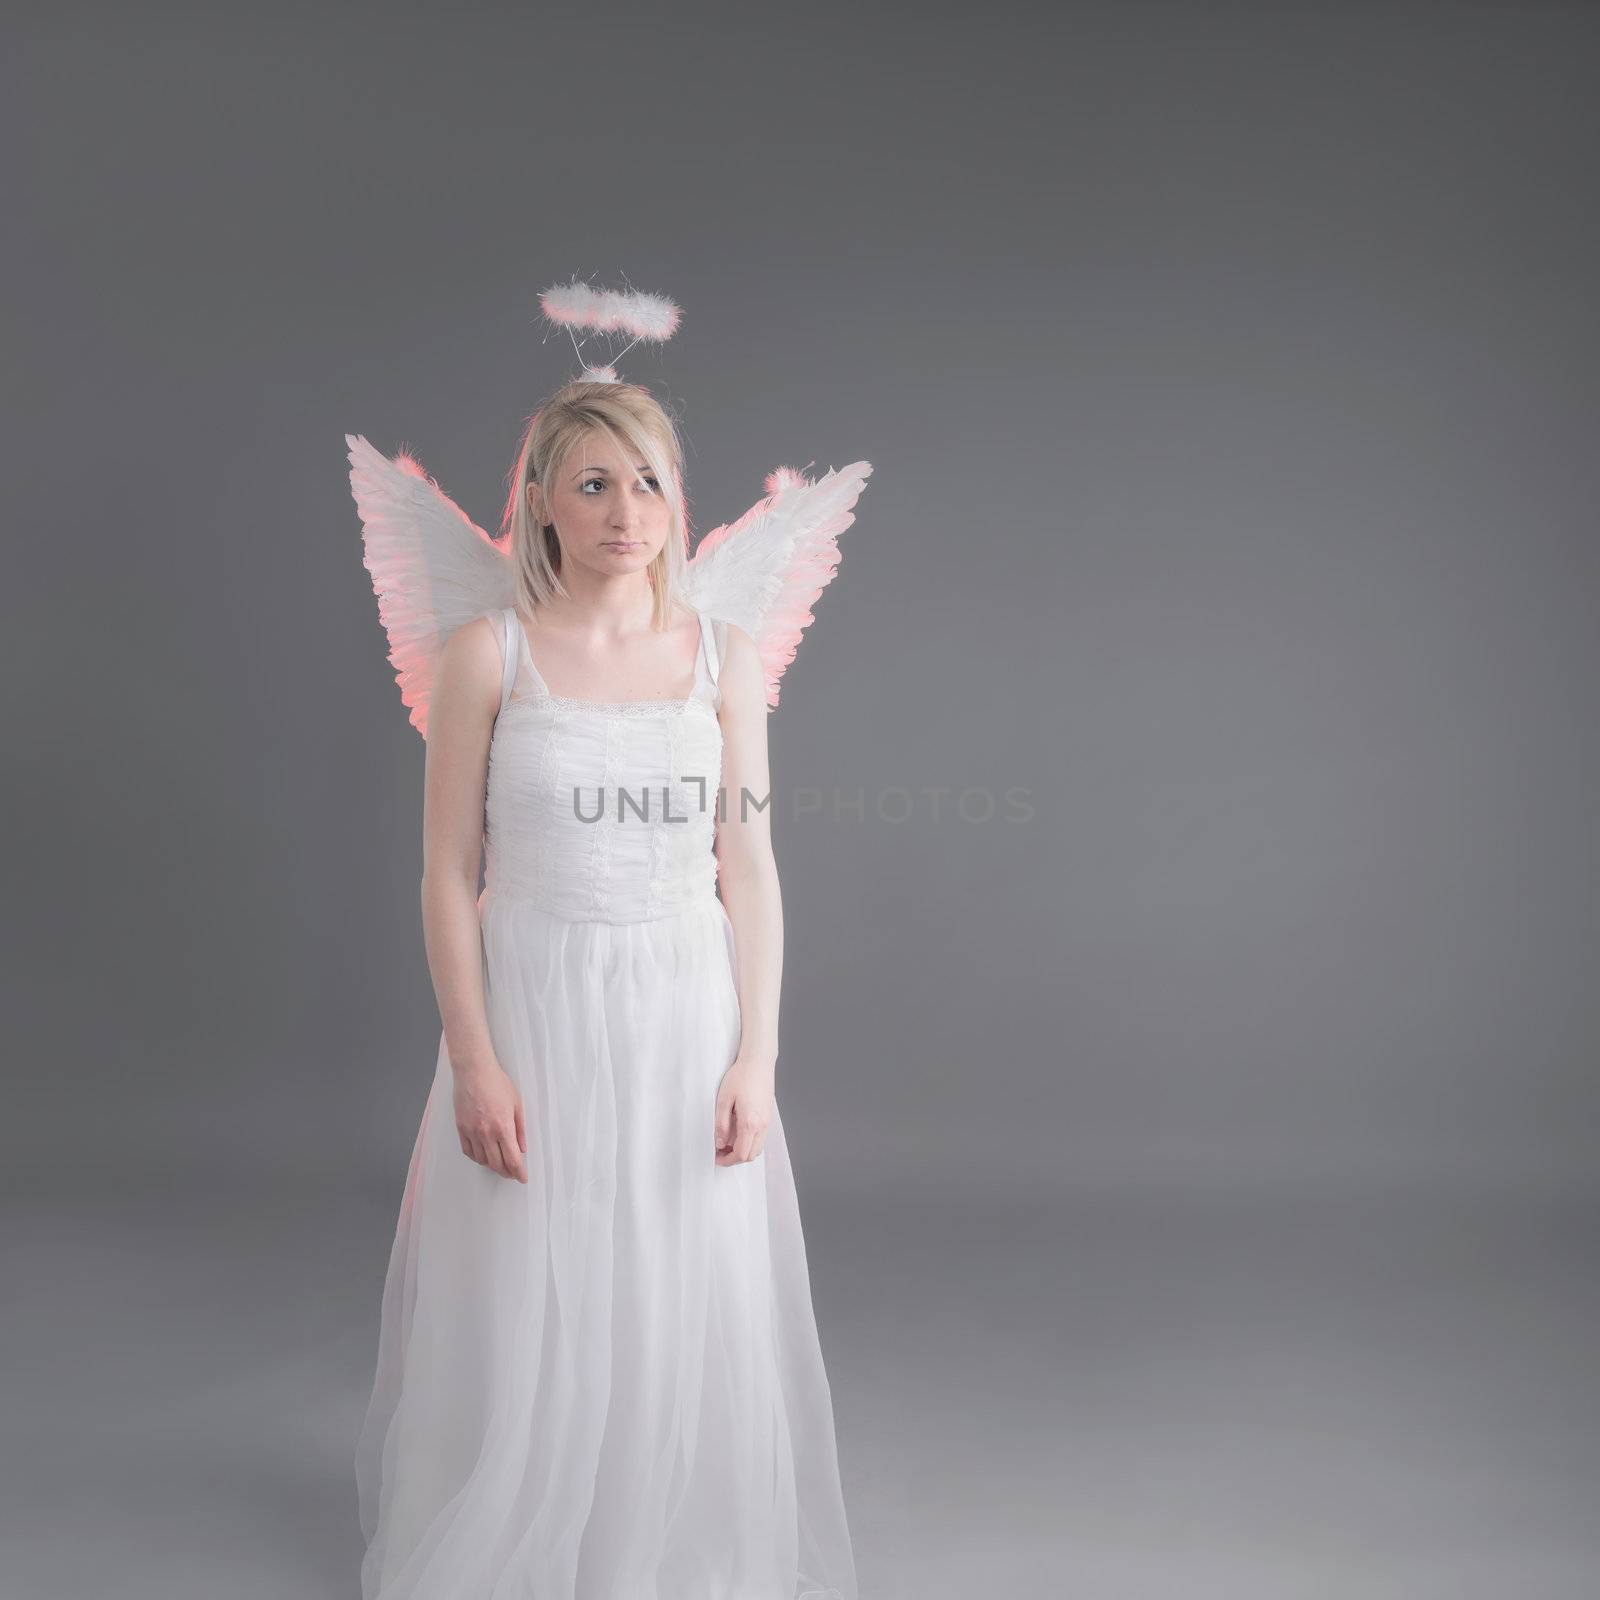 sad female angel in white outfit with wings and aureola